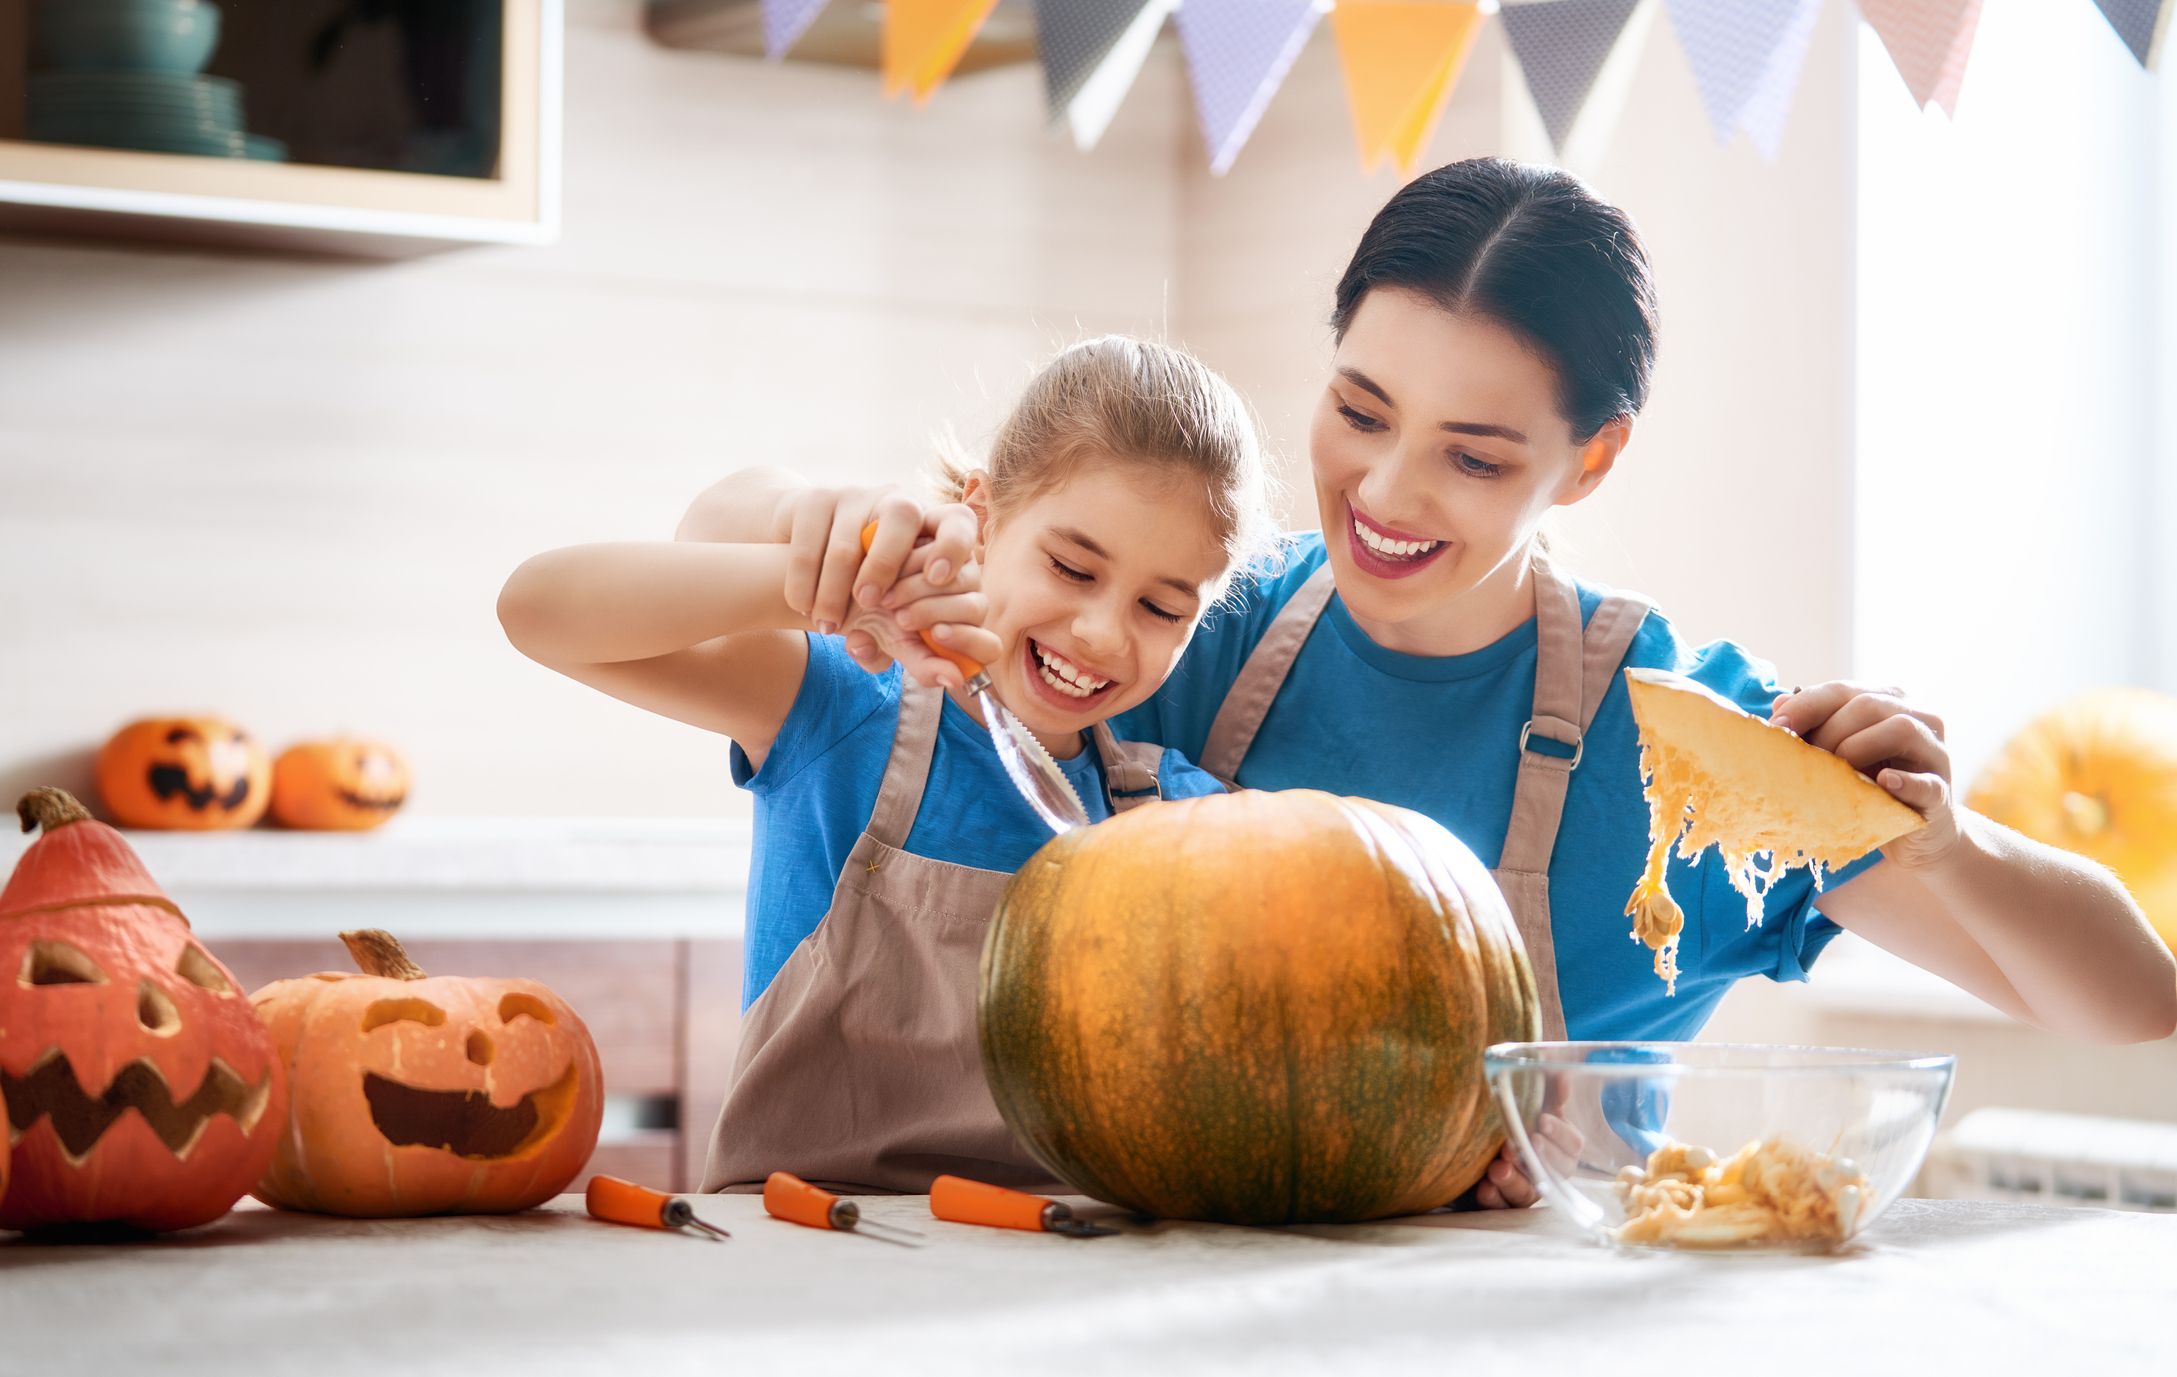 A mother and her young daughter carve a pumpkin in their kitchen.